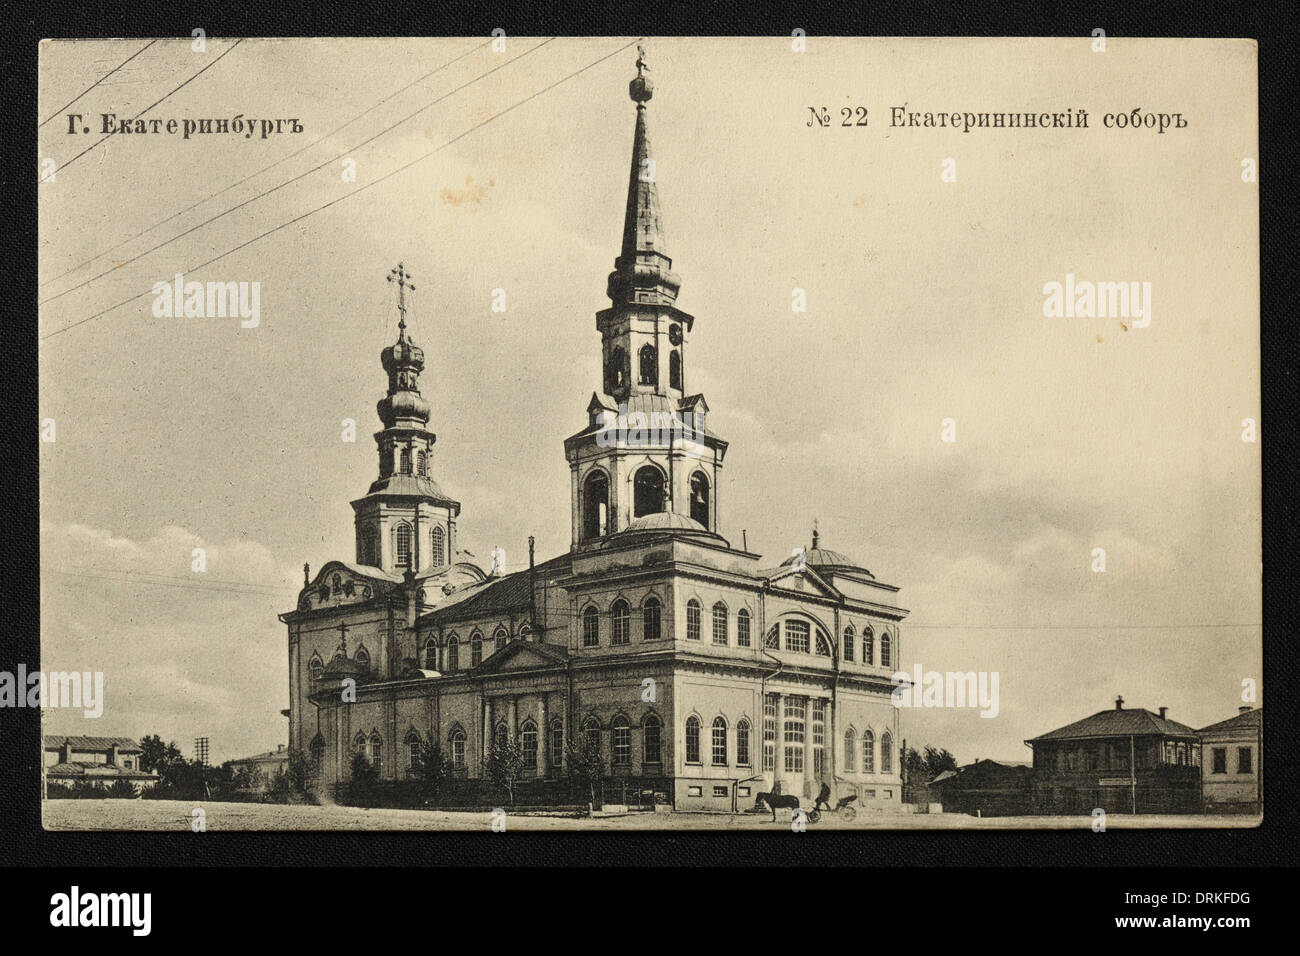 Saint Catherine's Cathedral in Yekaterinburg, Russian Empire. Black and white vintage photograph by Russian photographer Veniamin Metenkov dated from the beginning of the 20th century issued in the Russian vintage postcard published by Veniamin Metenkov himself in Yekaterinburg. Text in Russian: Yekaterinburg. St Catherine's Cathedral. The cathedral was demolished by the Bolsheviks in the 1930s. Courtesy of the Azoor Postcard Collection. Stock Photo